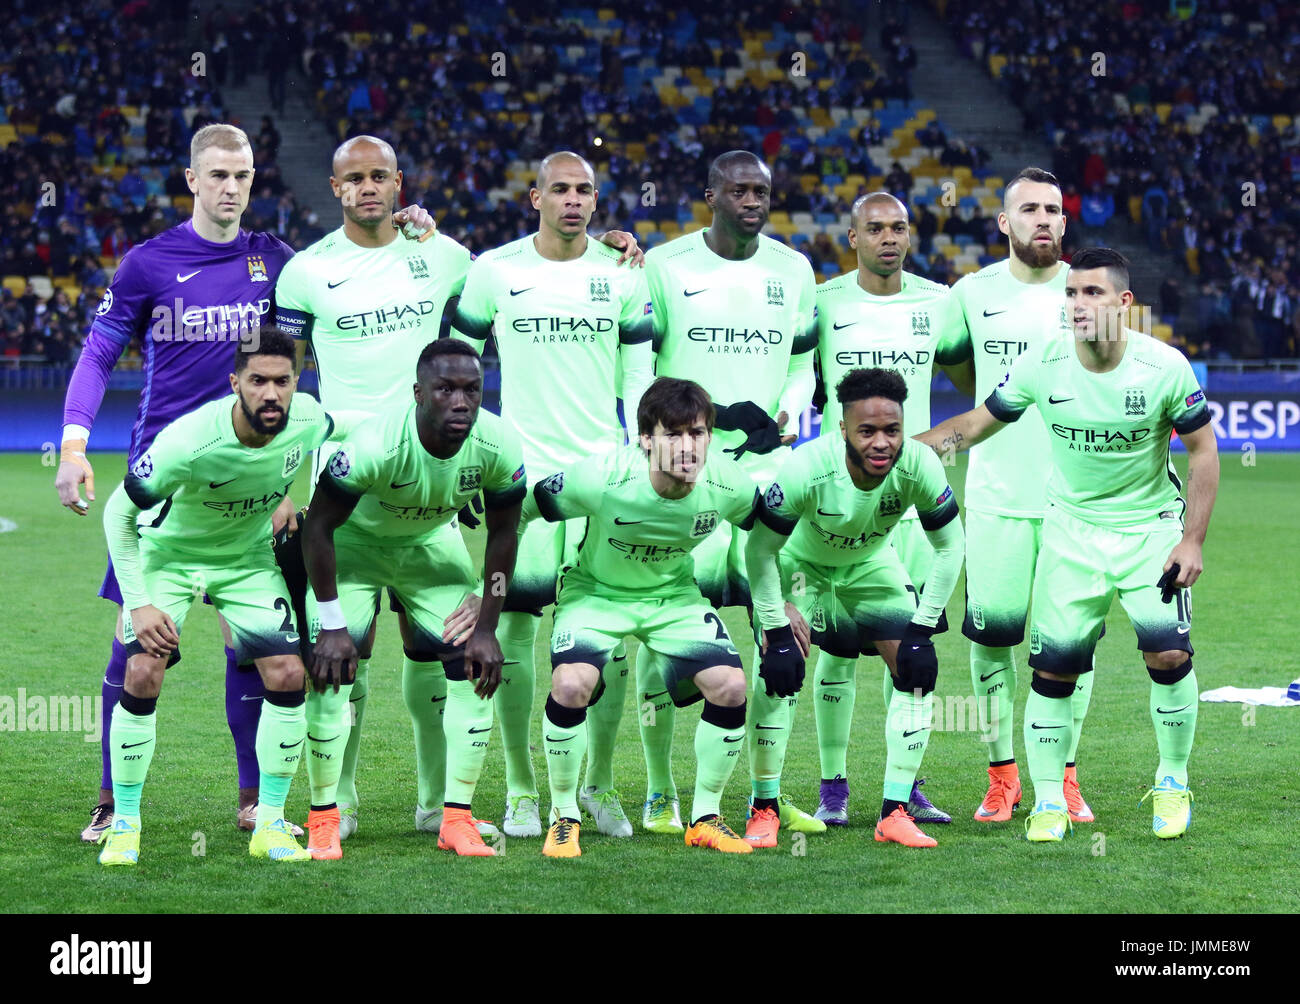 KYIV, UKRAINE - FEBRUARY 24, 2016: FC Manchester City players pose for a group photo before UEFA Champions League Round of 16 football match against FC Dynamo Kyiv at NSC Olimpiyskyi stadium in Kyiv Stock Photo